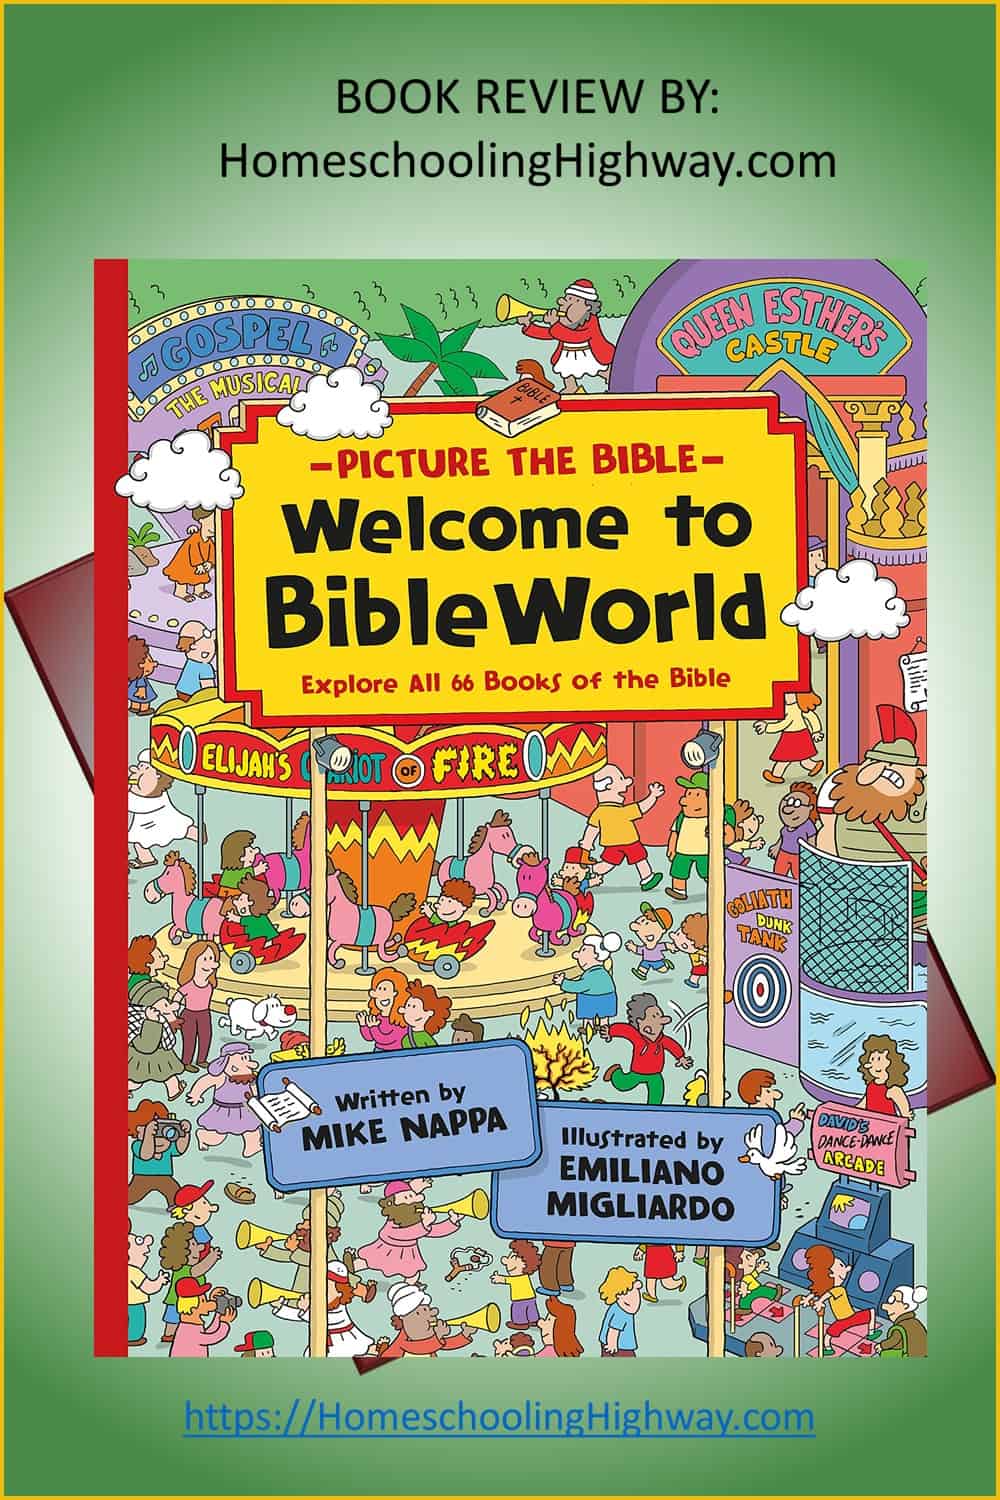 Welcome to BibleWorld. A Children's Book Review by Homeschooling Highway